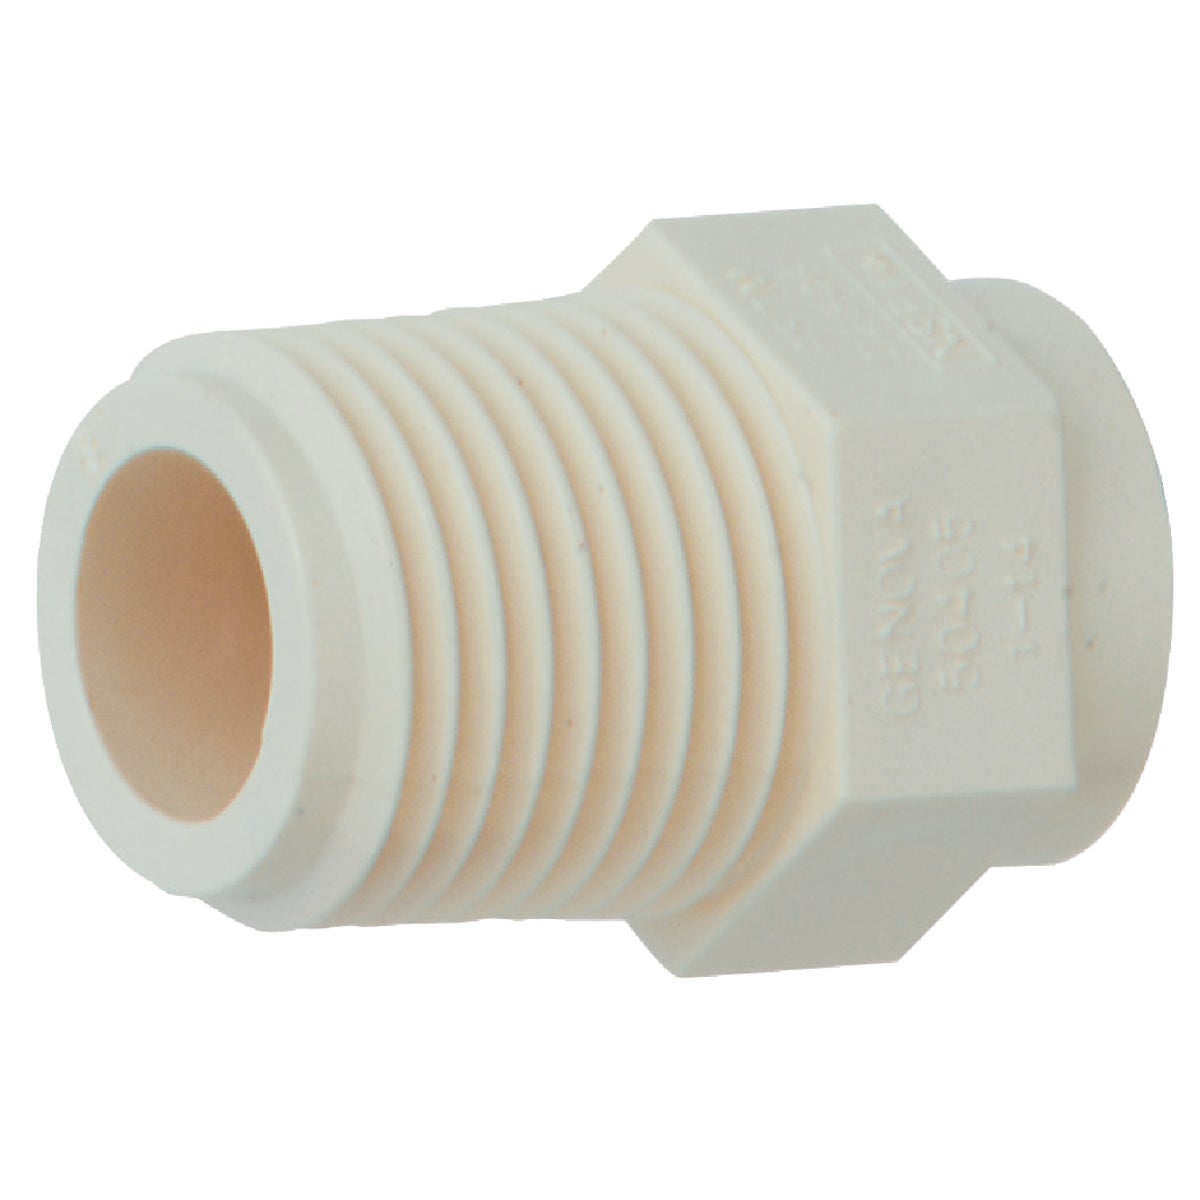 Item 434532, Use to adapt to metal threaded fittings in COLD WATER APPLICATION ONLY.